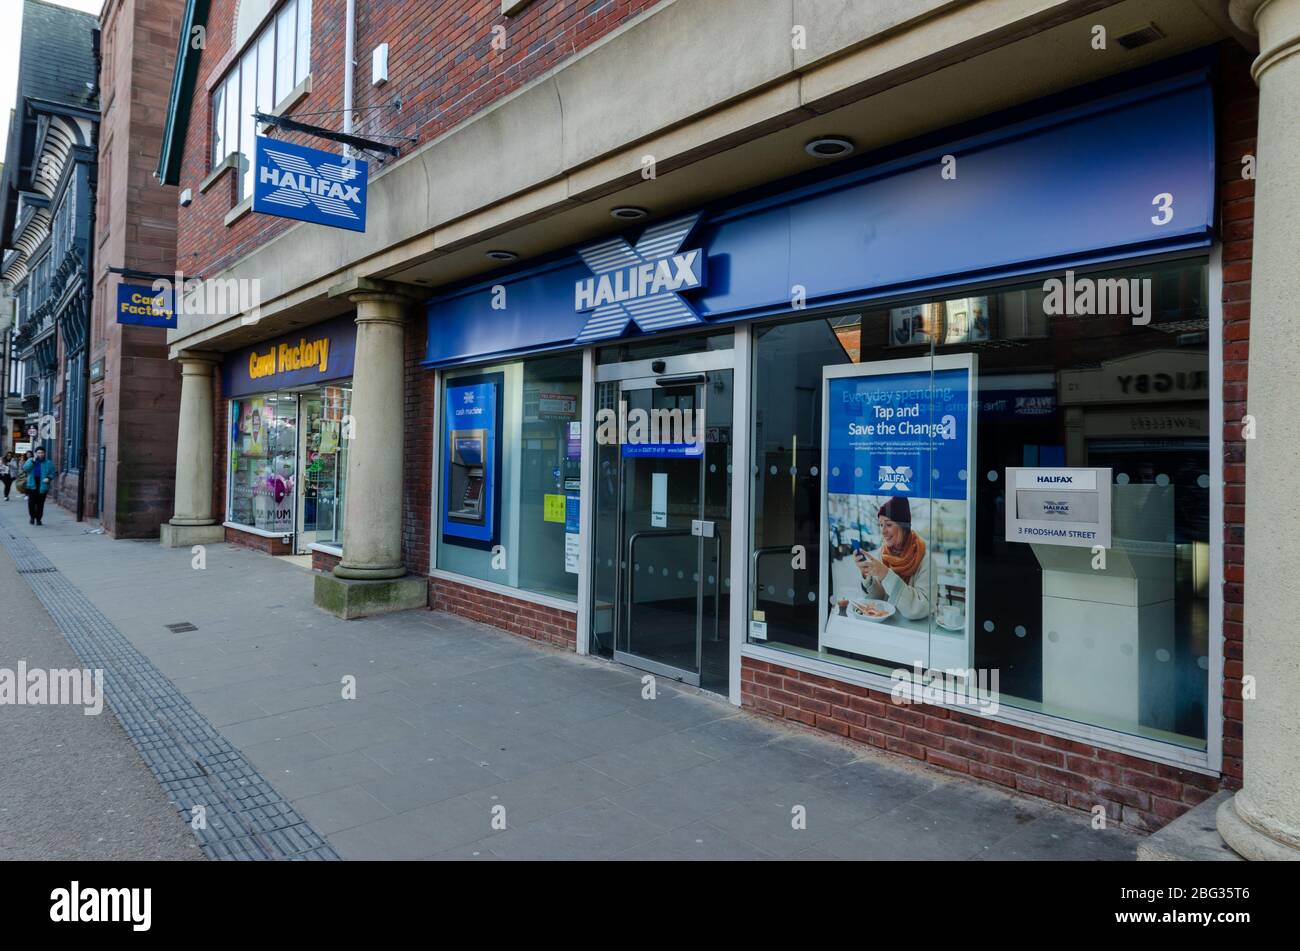 Chester, UK: Mar 1, 2020: The Halifax Building Society branch on Frodsham Street displays a poster to promote their Save the Change money savings sche Stock Photo